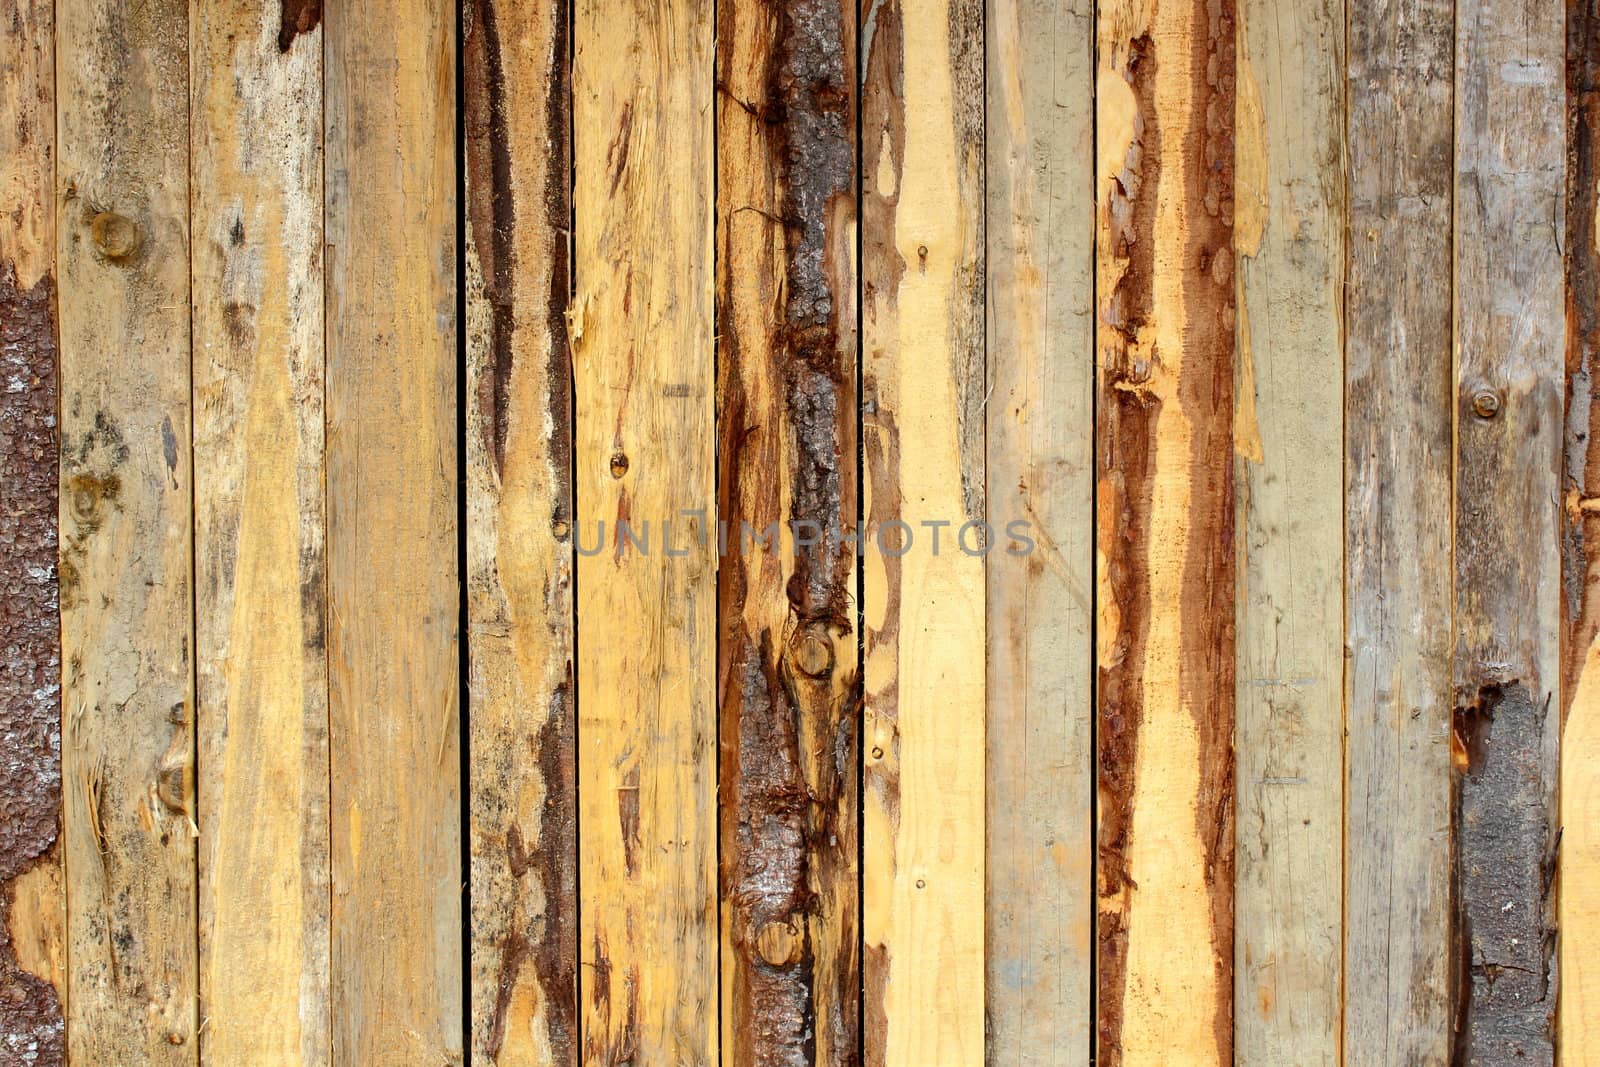 rough wooden texture at an improvised lodge in the mountains